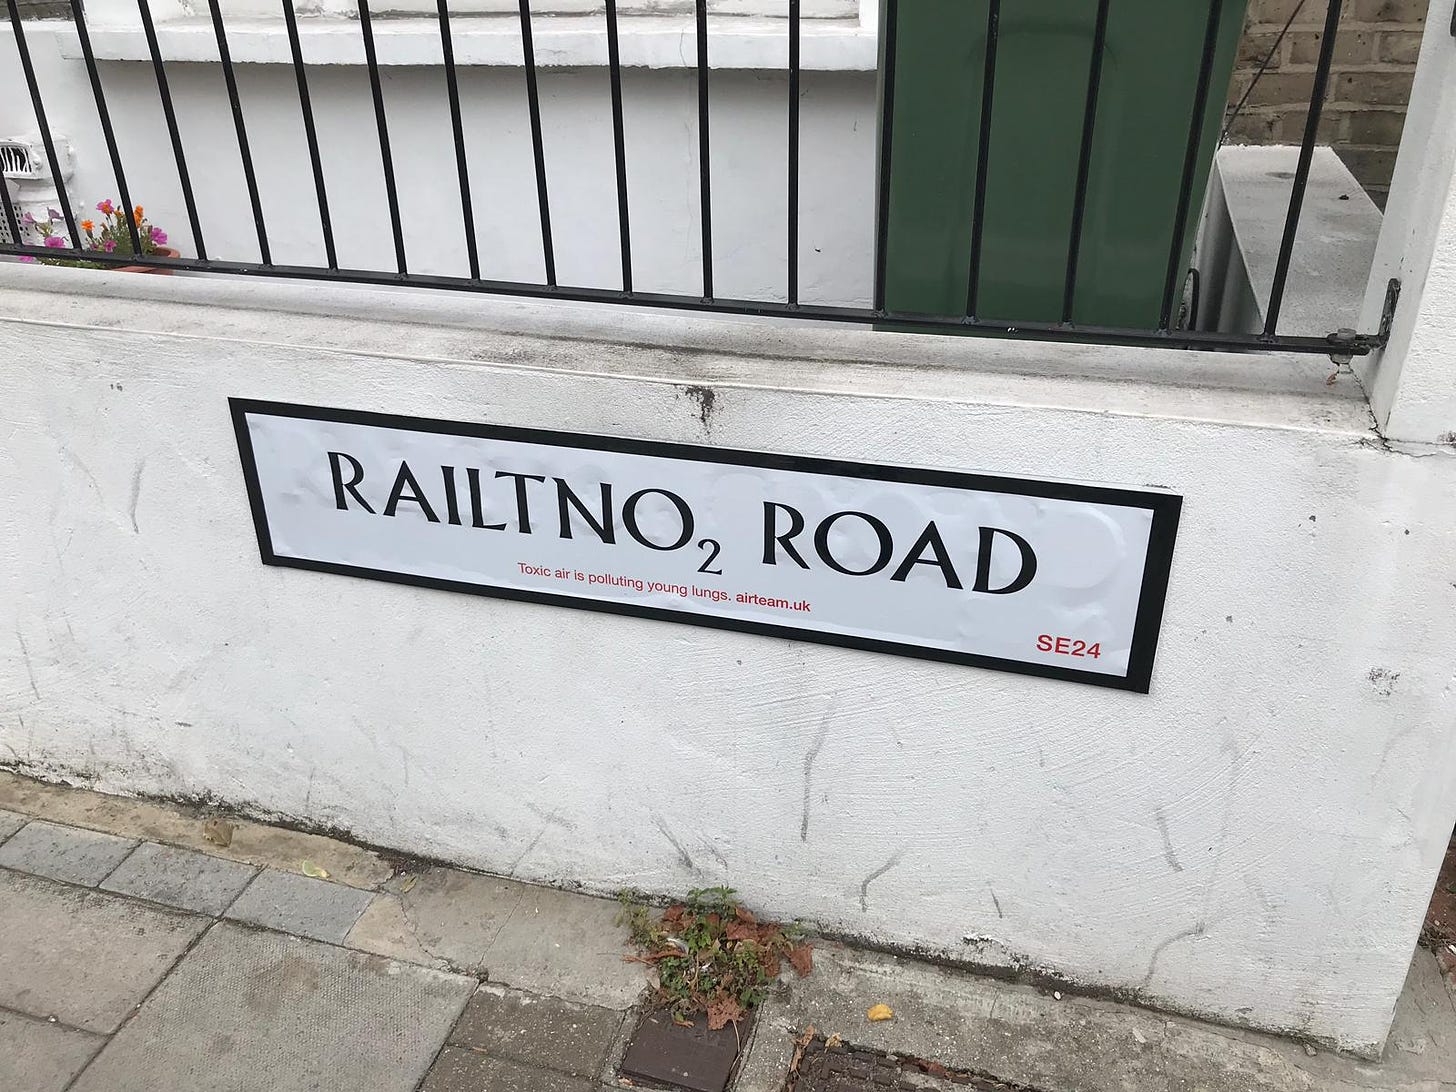 A photo of the Railton Road street sign that had been modified to read RailtNO2 Road